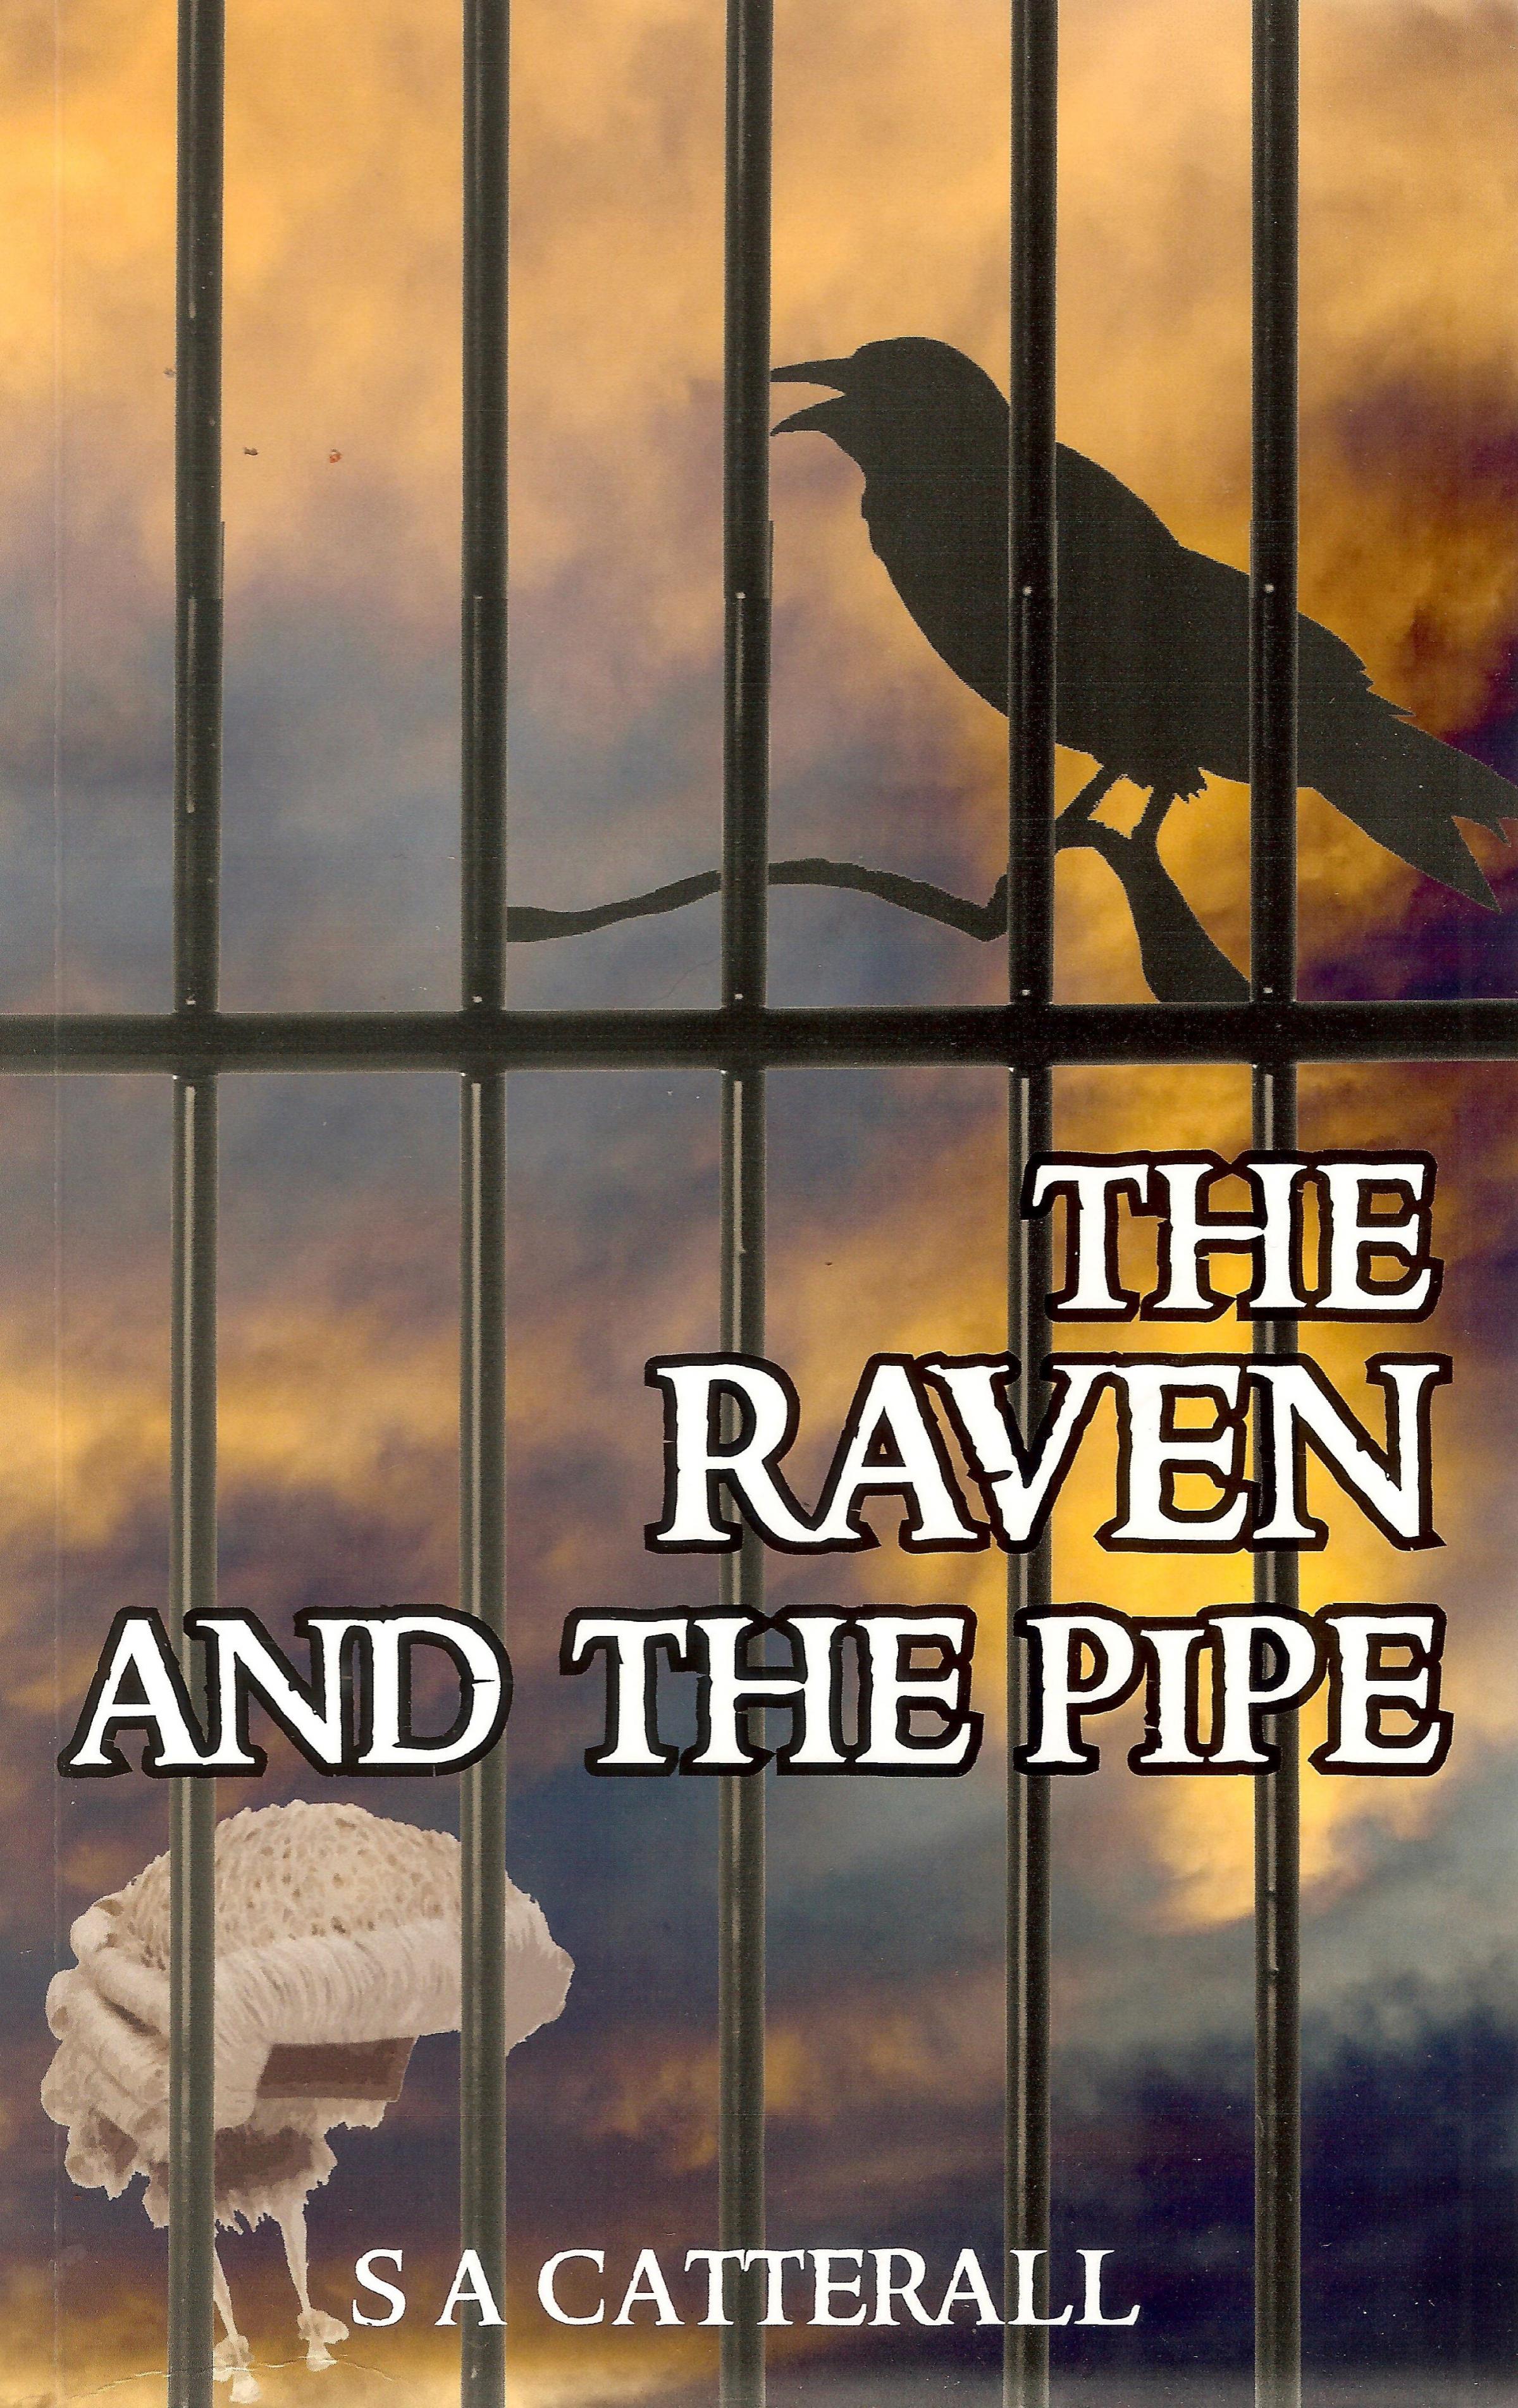 The Raven and The Pipe by SA Catterall costs £2.99 from YPS Publishing